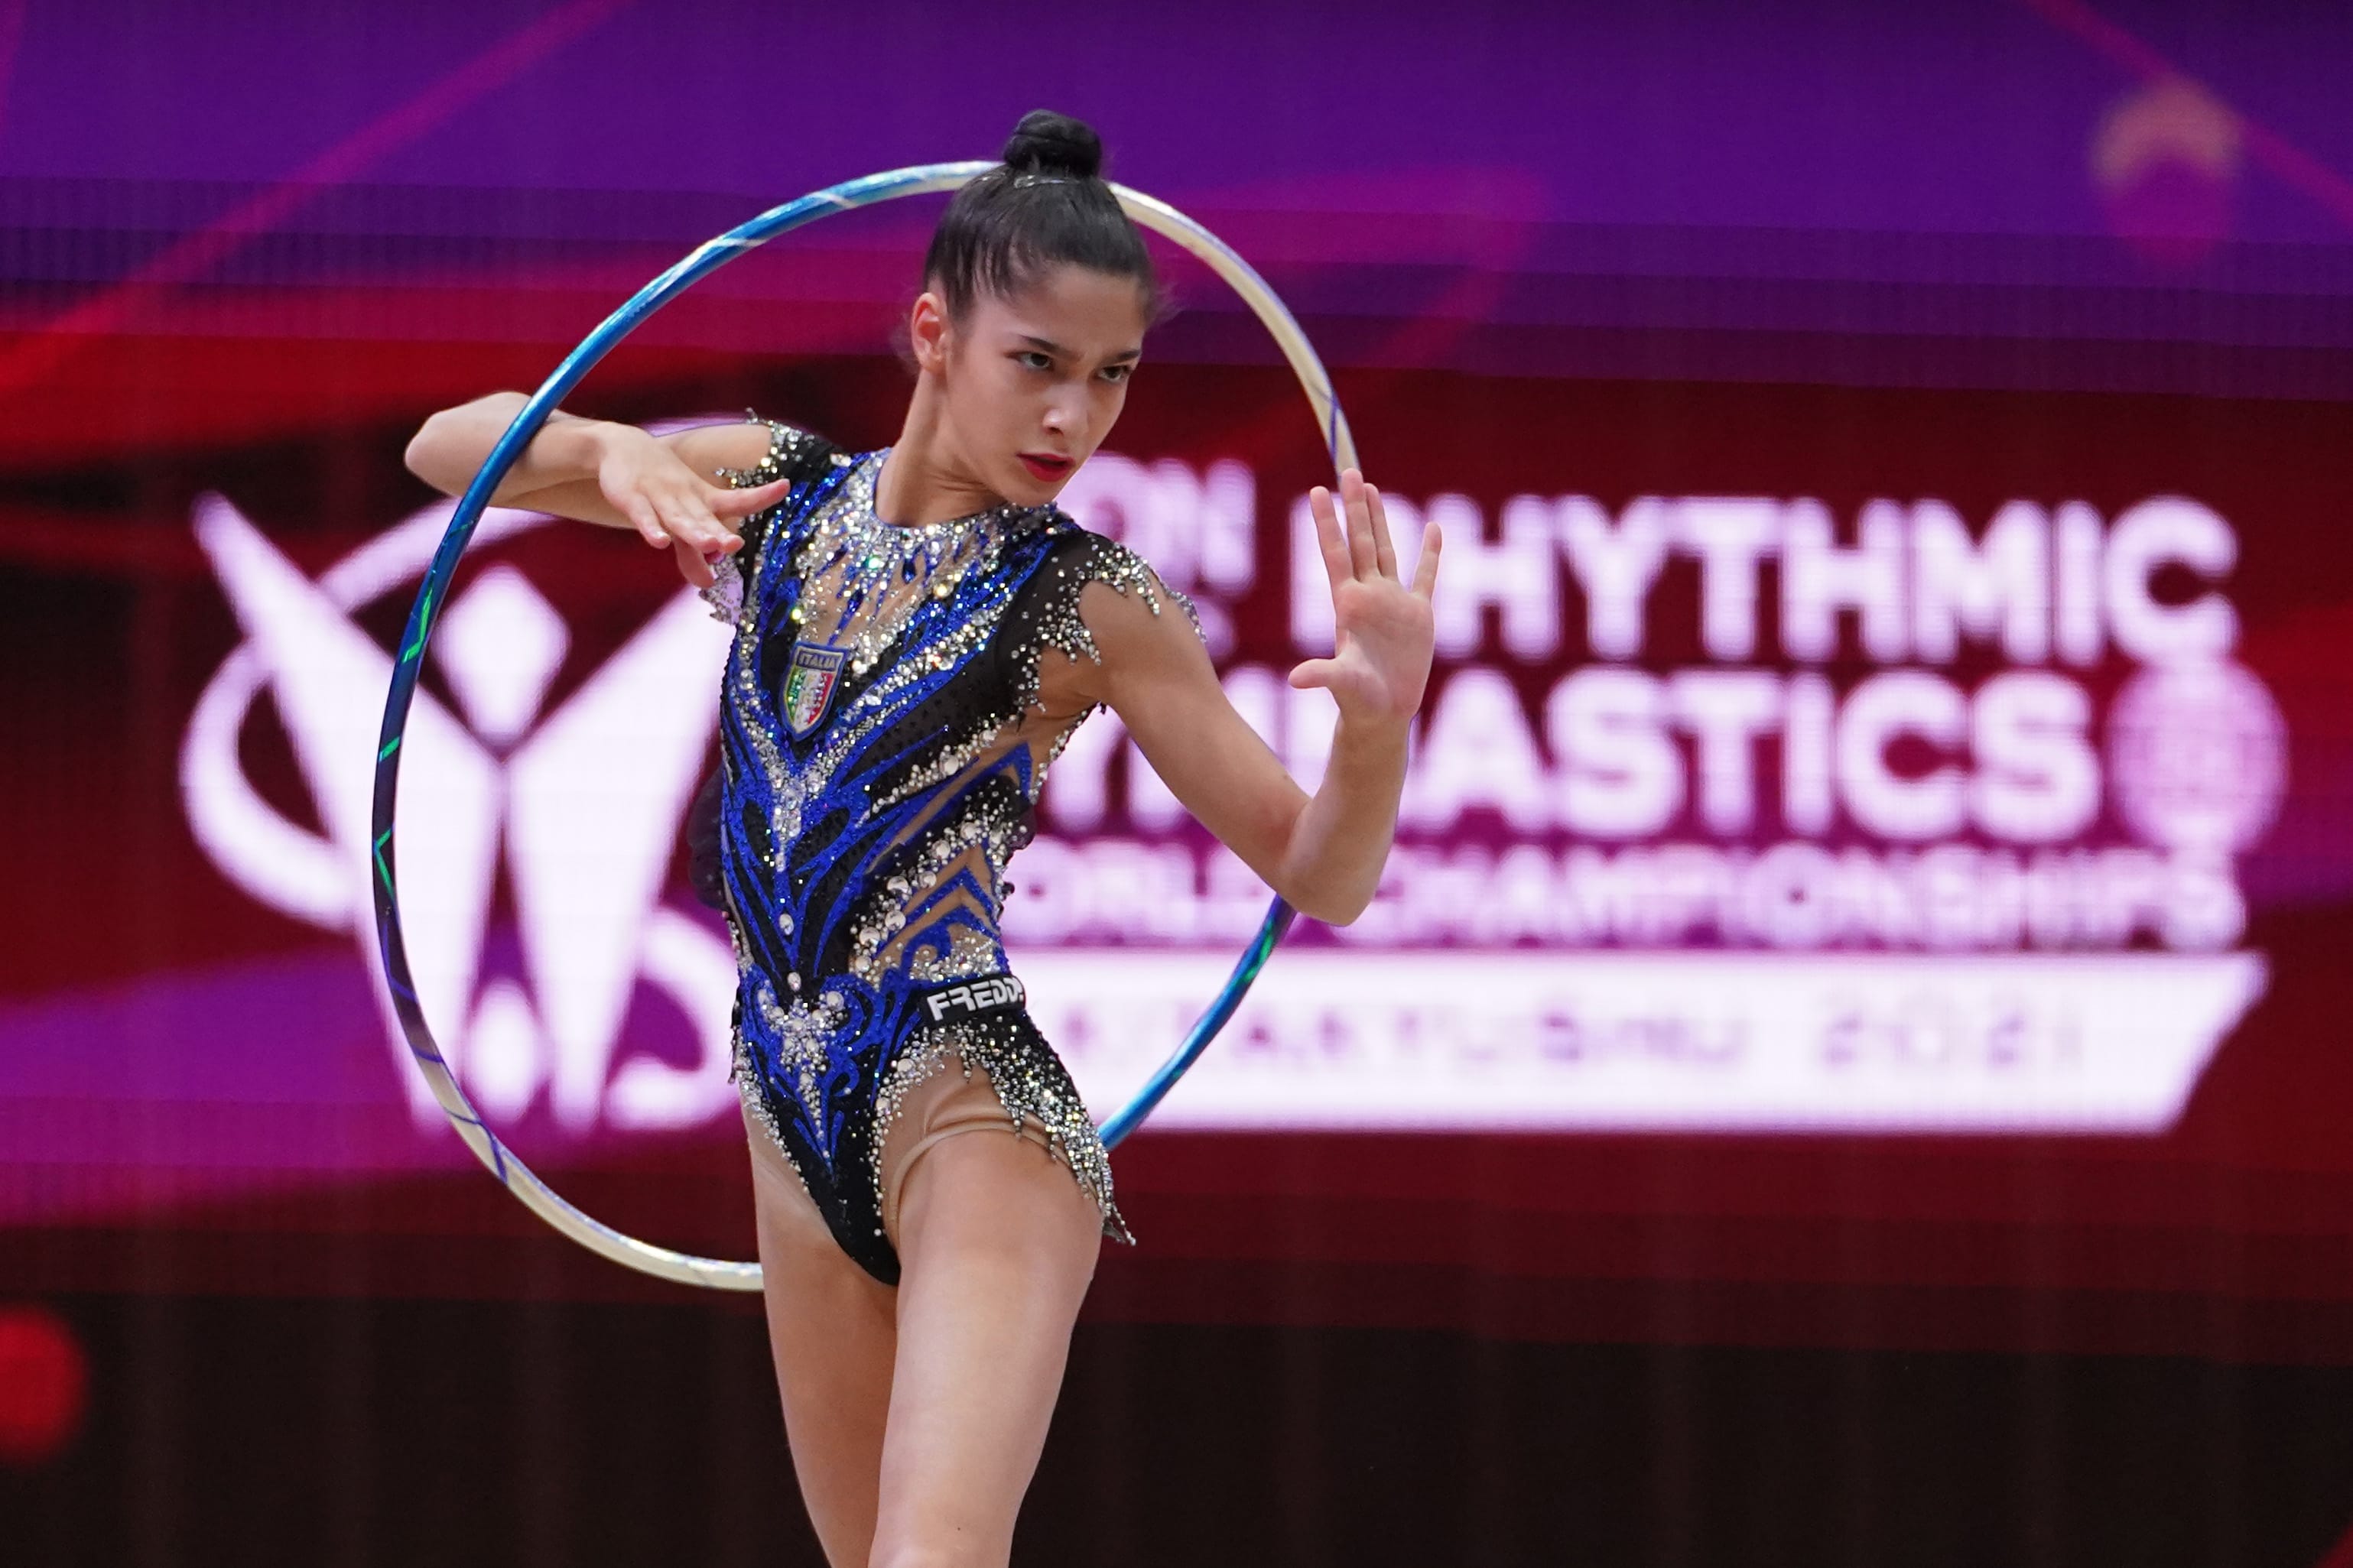 Rhythmic Gymnastics World Championships 2022 in Sofia Preview, schedule and how to watch the stars in action